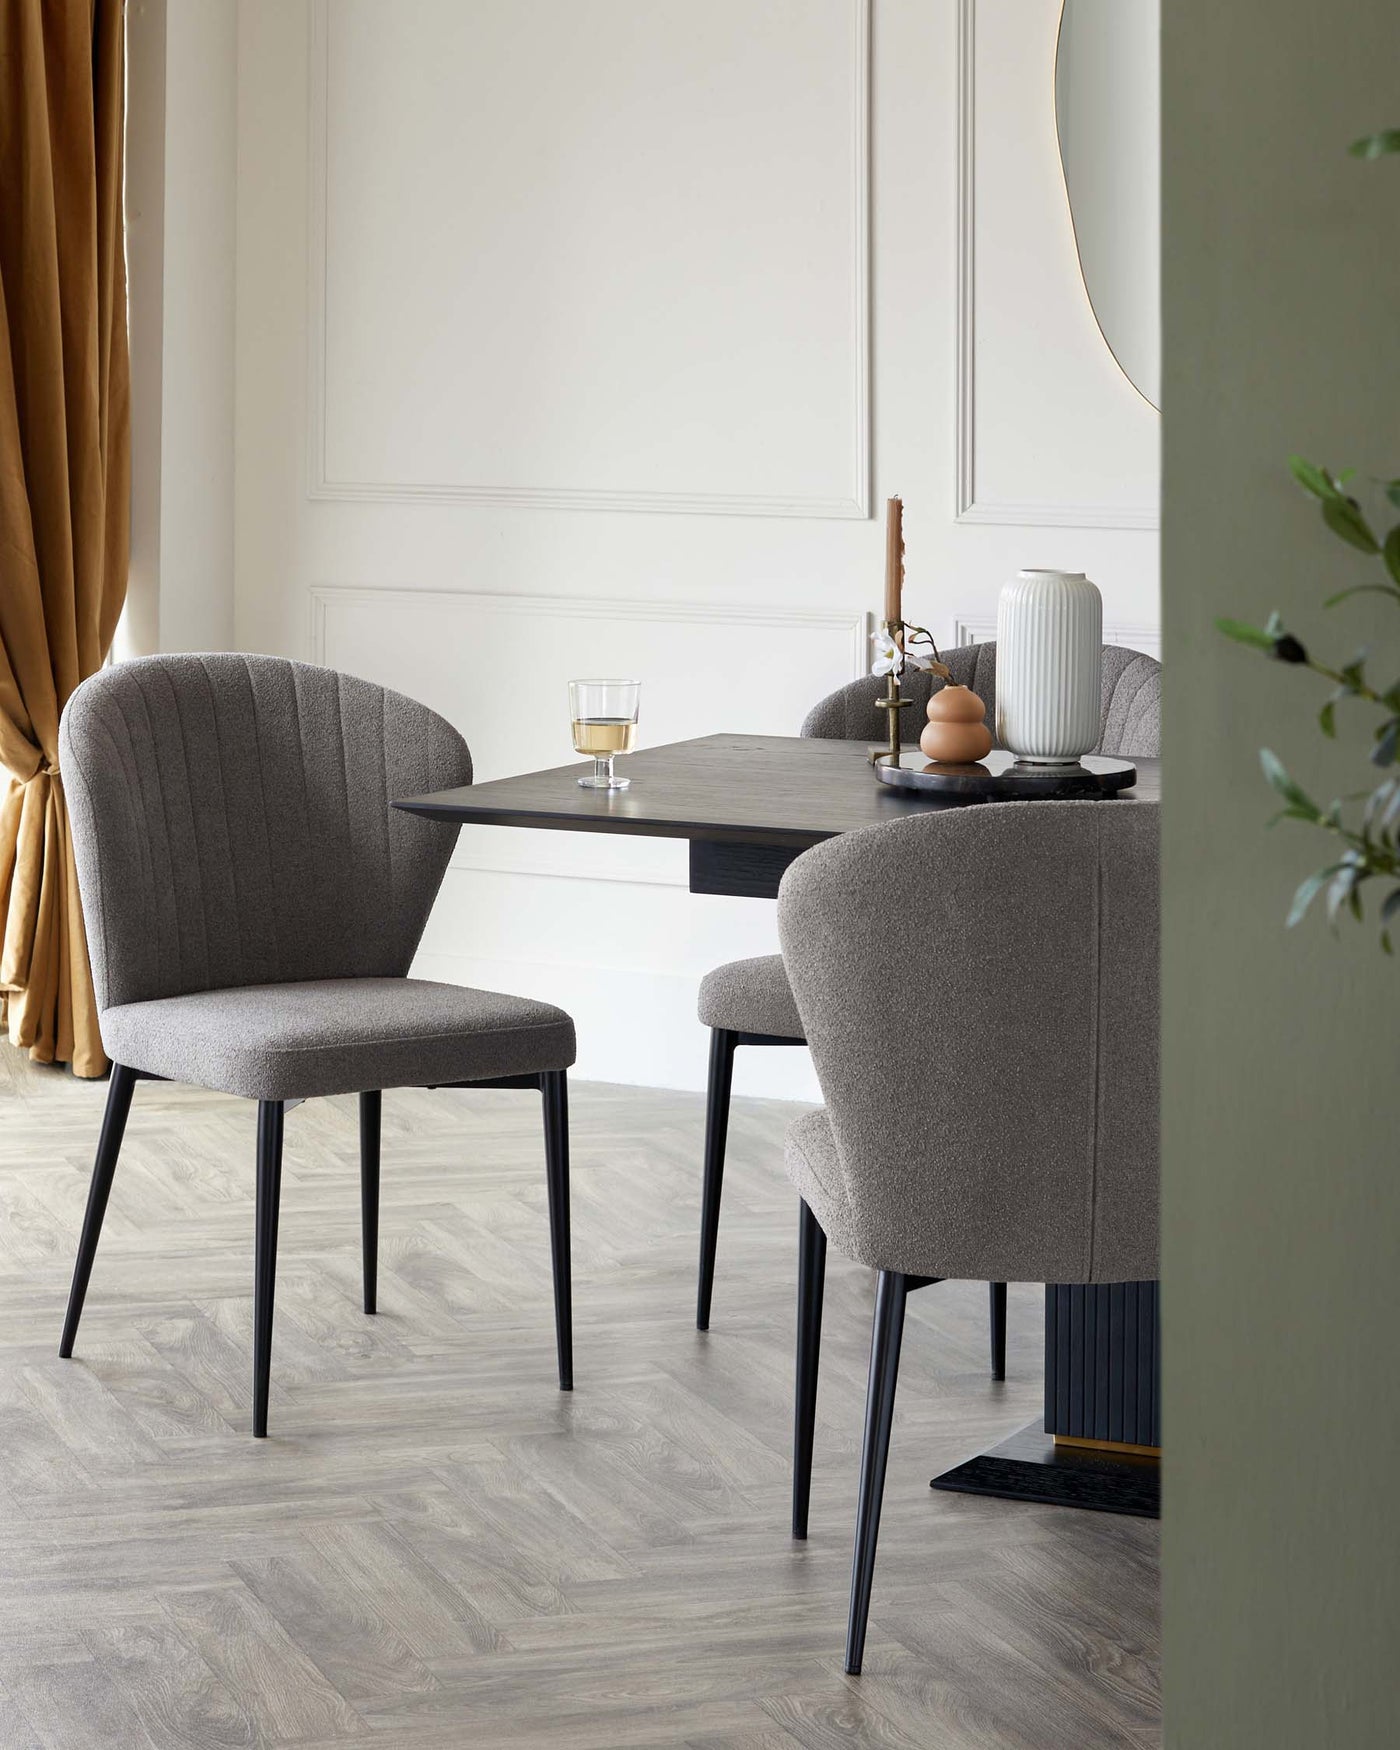 Modern minimalist dining set featuring a sleek rectangular table with a dark wood finish and black metal legs. Accompanied by two upholstered dining chairs in a textured grey fabric with vertical stitching on the backrest and elegant black metal legs. The set is staged in a contemporary room with neutral walls and light wood flooring.